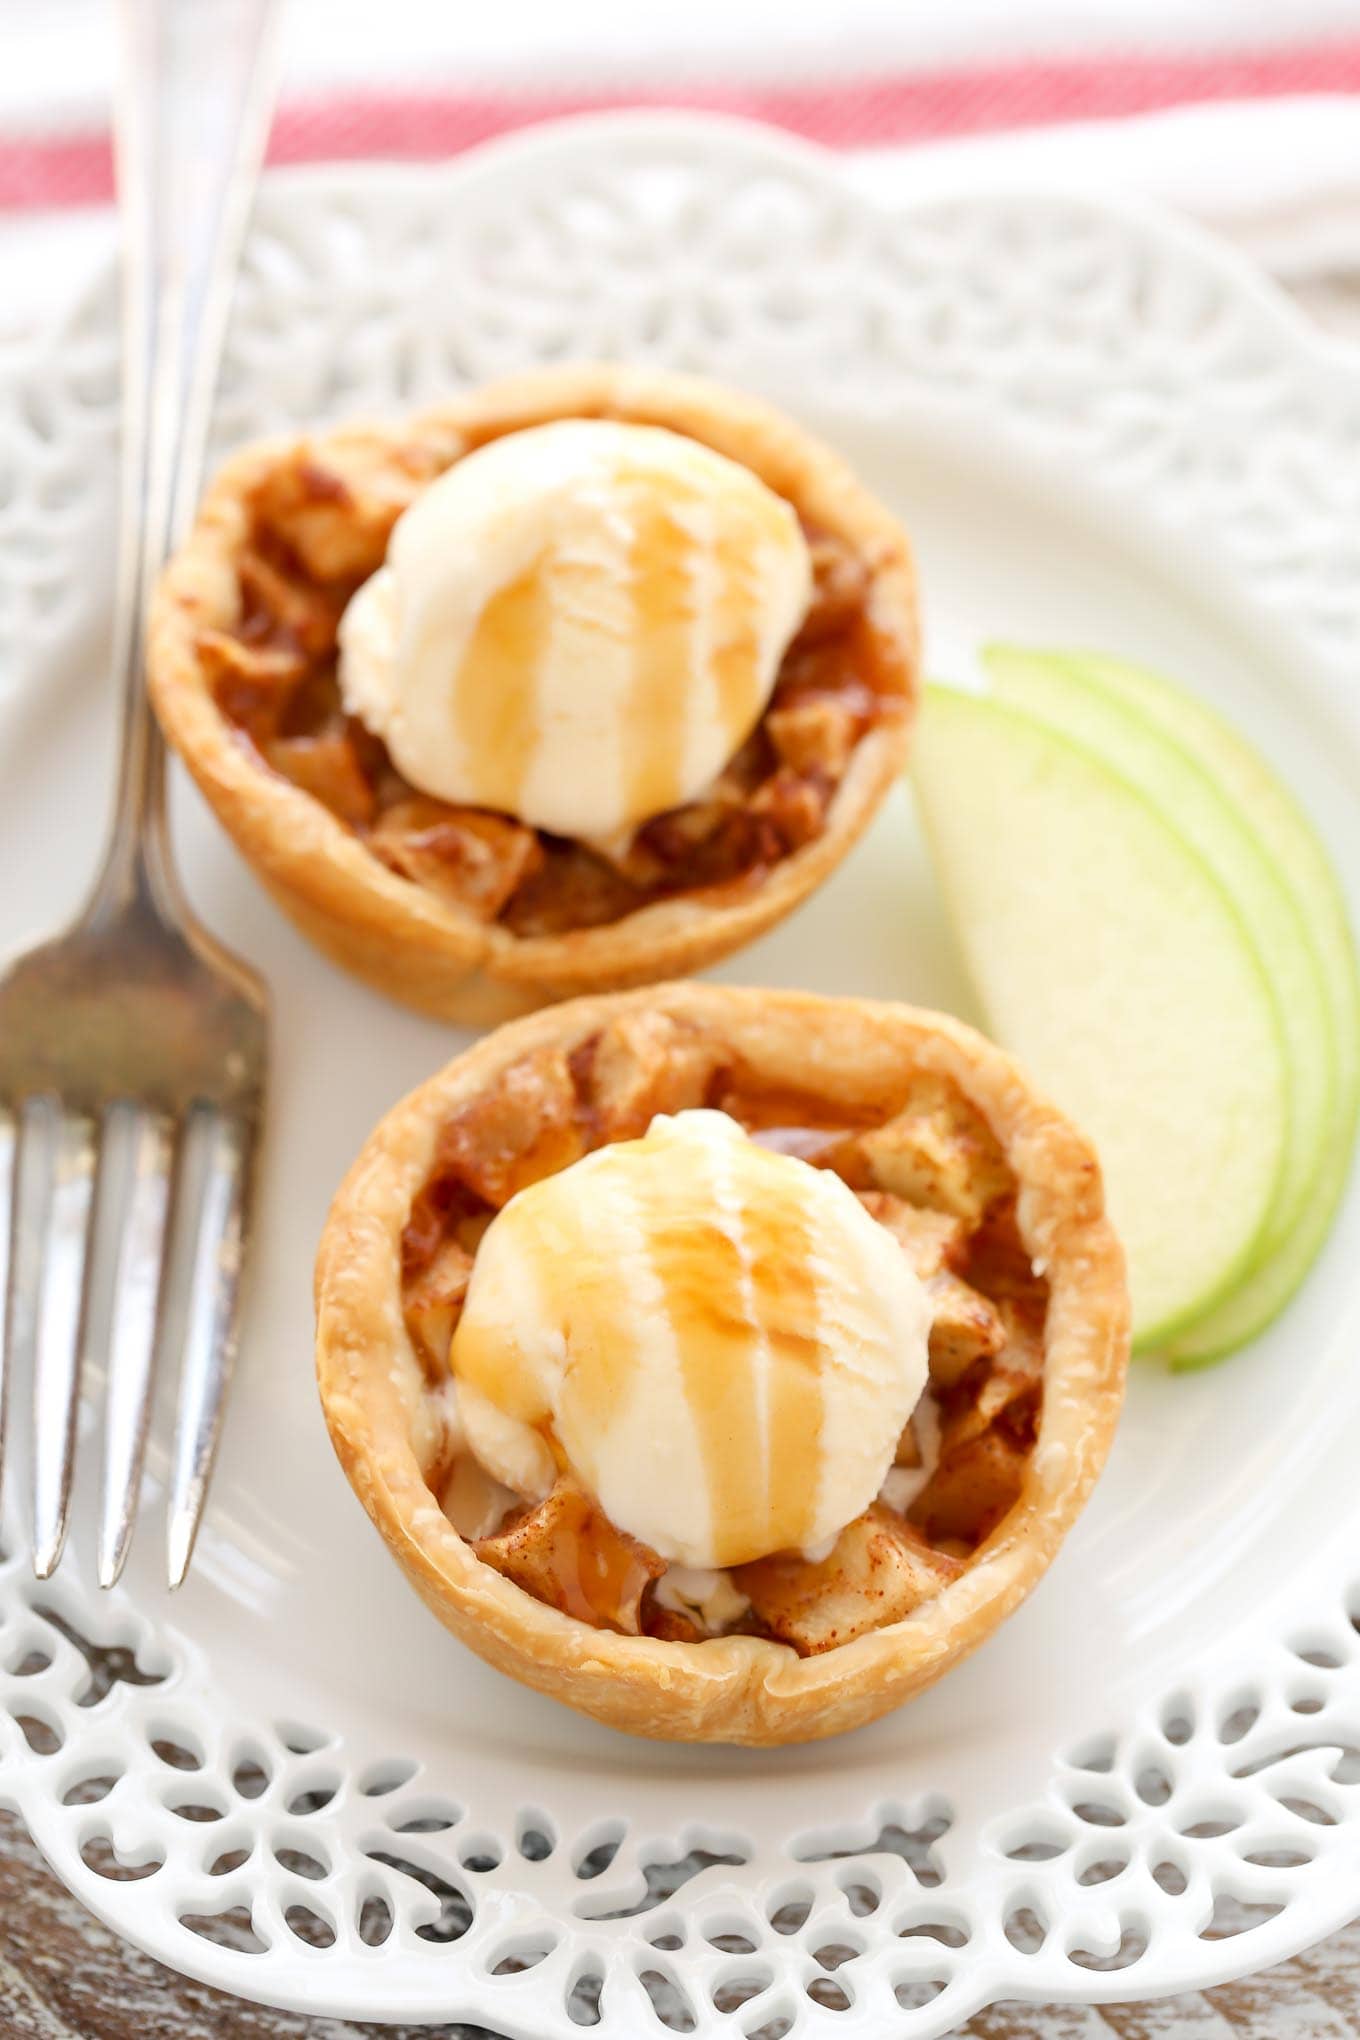 Two mini apple pies topped with a small scoop of ice cream and a drizzle of salted caramel sauce. A fork and a few slices of apples lay on the plate next to the pies.